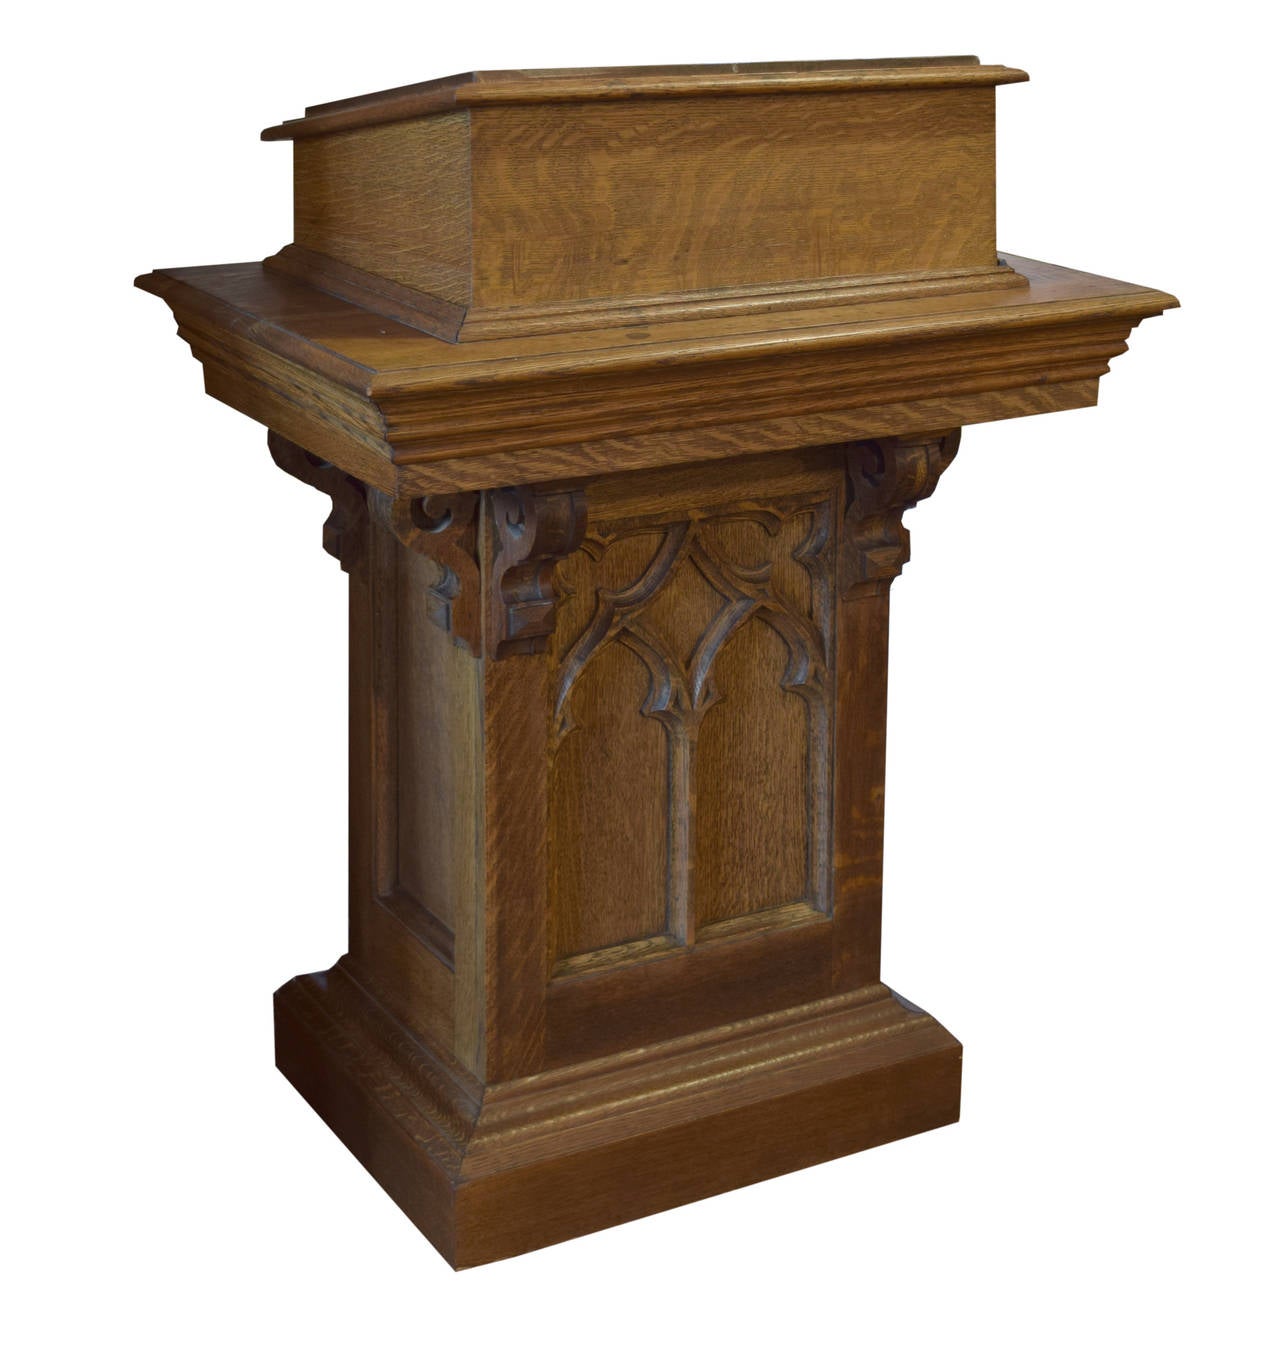 American Gothic carved oak lectern with arched paneled sides and an adjustable height slanted top with a waxed canvas pad, circa 1920.